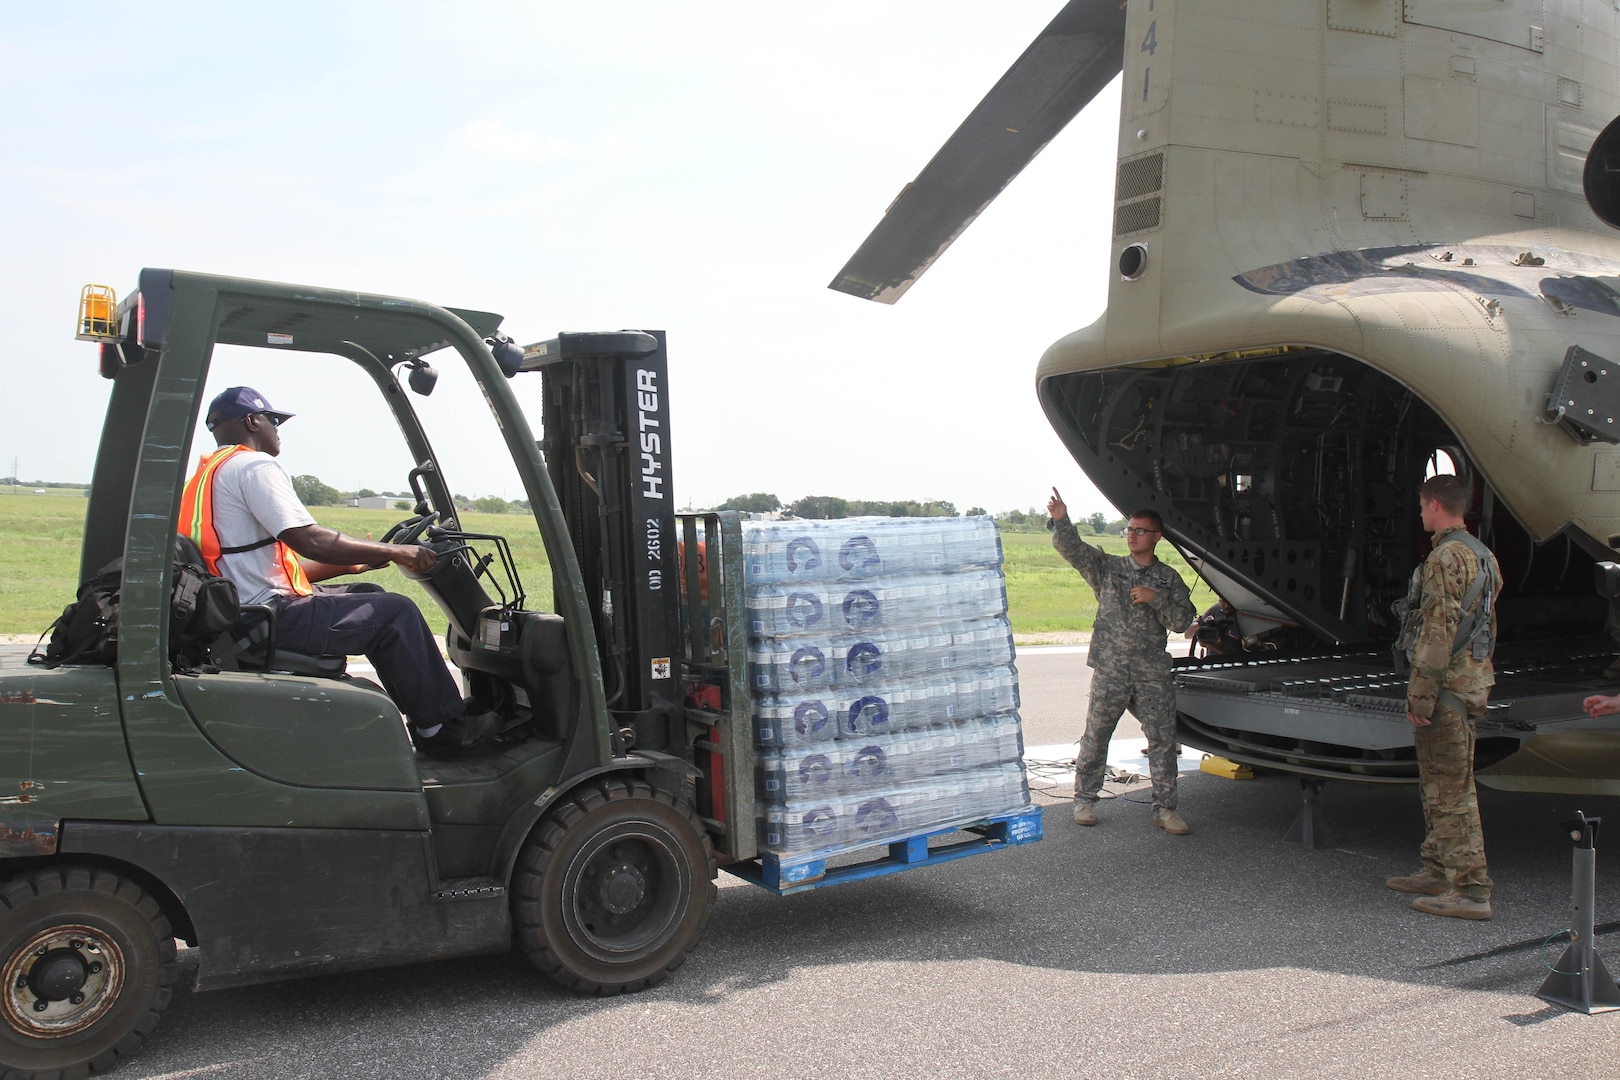 Soldiers with 2nd Battalion, 501st Aviation Regiment from Fort Bliss, Texas, help load pallets of water onto a CH-47 Chinook at Joint Base San Antonio-Seguin Auxiliary Airfield in Seguin, Texas as part Hurricane Harvey Relief efforts Sept. 3. One pallet contained 2,375 pounds of bottled water for citizens affected by Harvey.